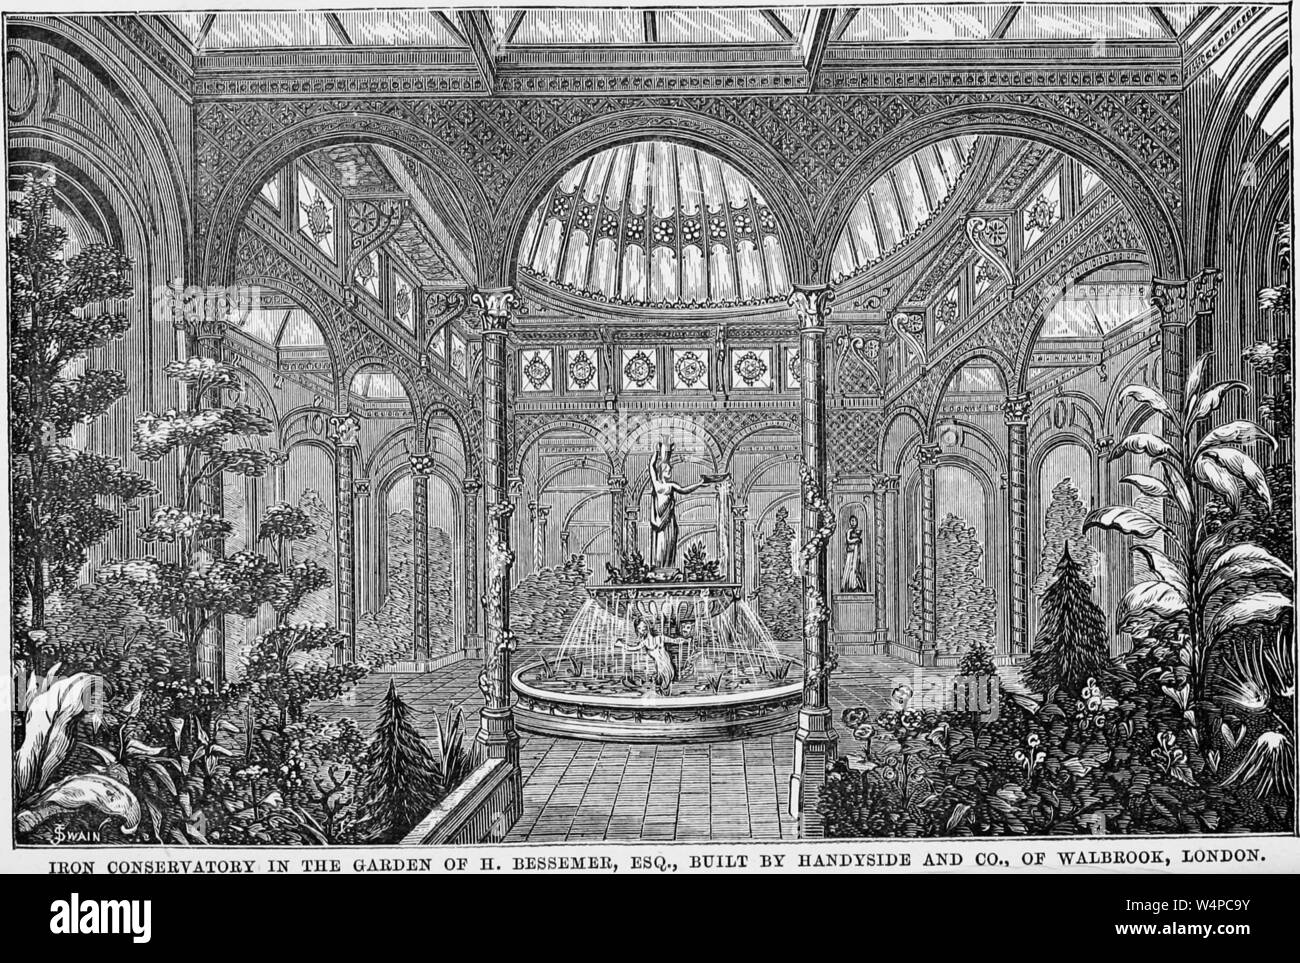 Engraving of the Iron Conservatory in the garden of Henry Bessemer, London, England, from the book 'The amateur's greenhouse and conservatory' by Shirley Hibberd, 1873. Courtesy Internet Archive. () Stock Photo